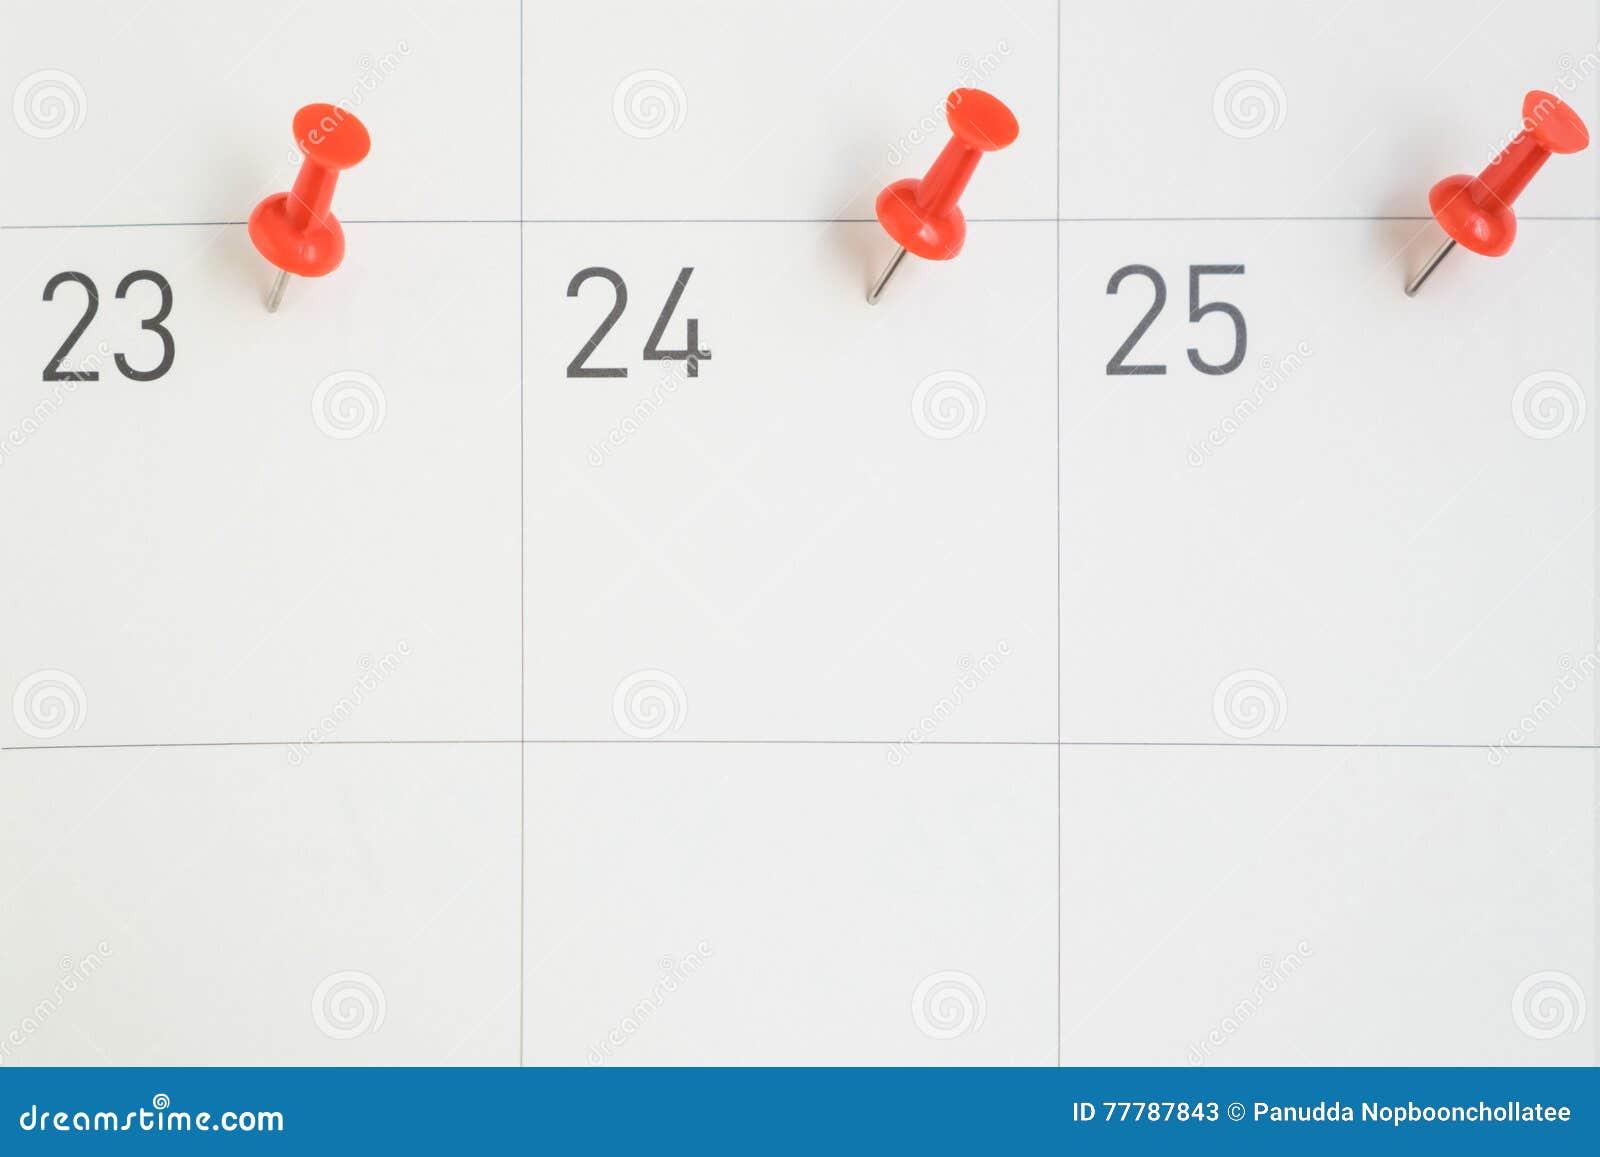 Red Pins Pinned On The Dates Of The Month On Calendar Paper Stock Image